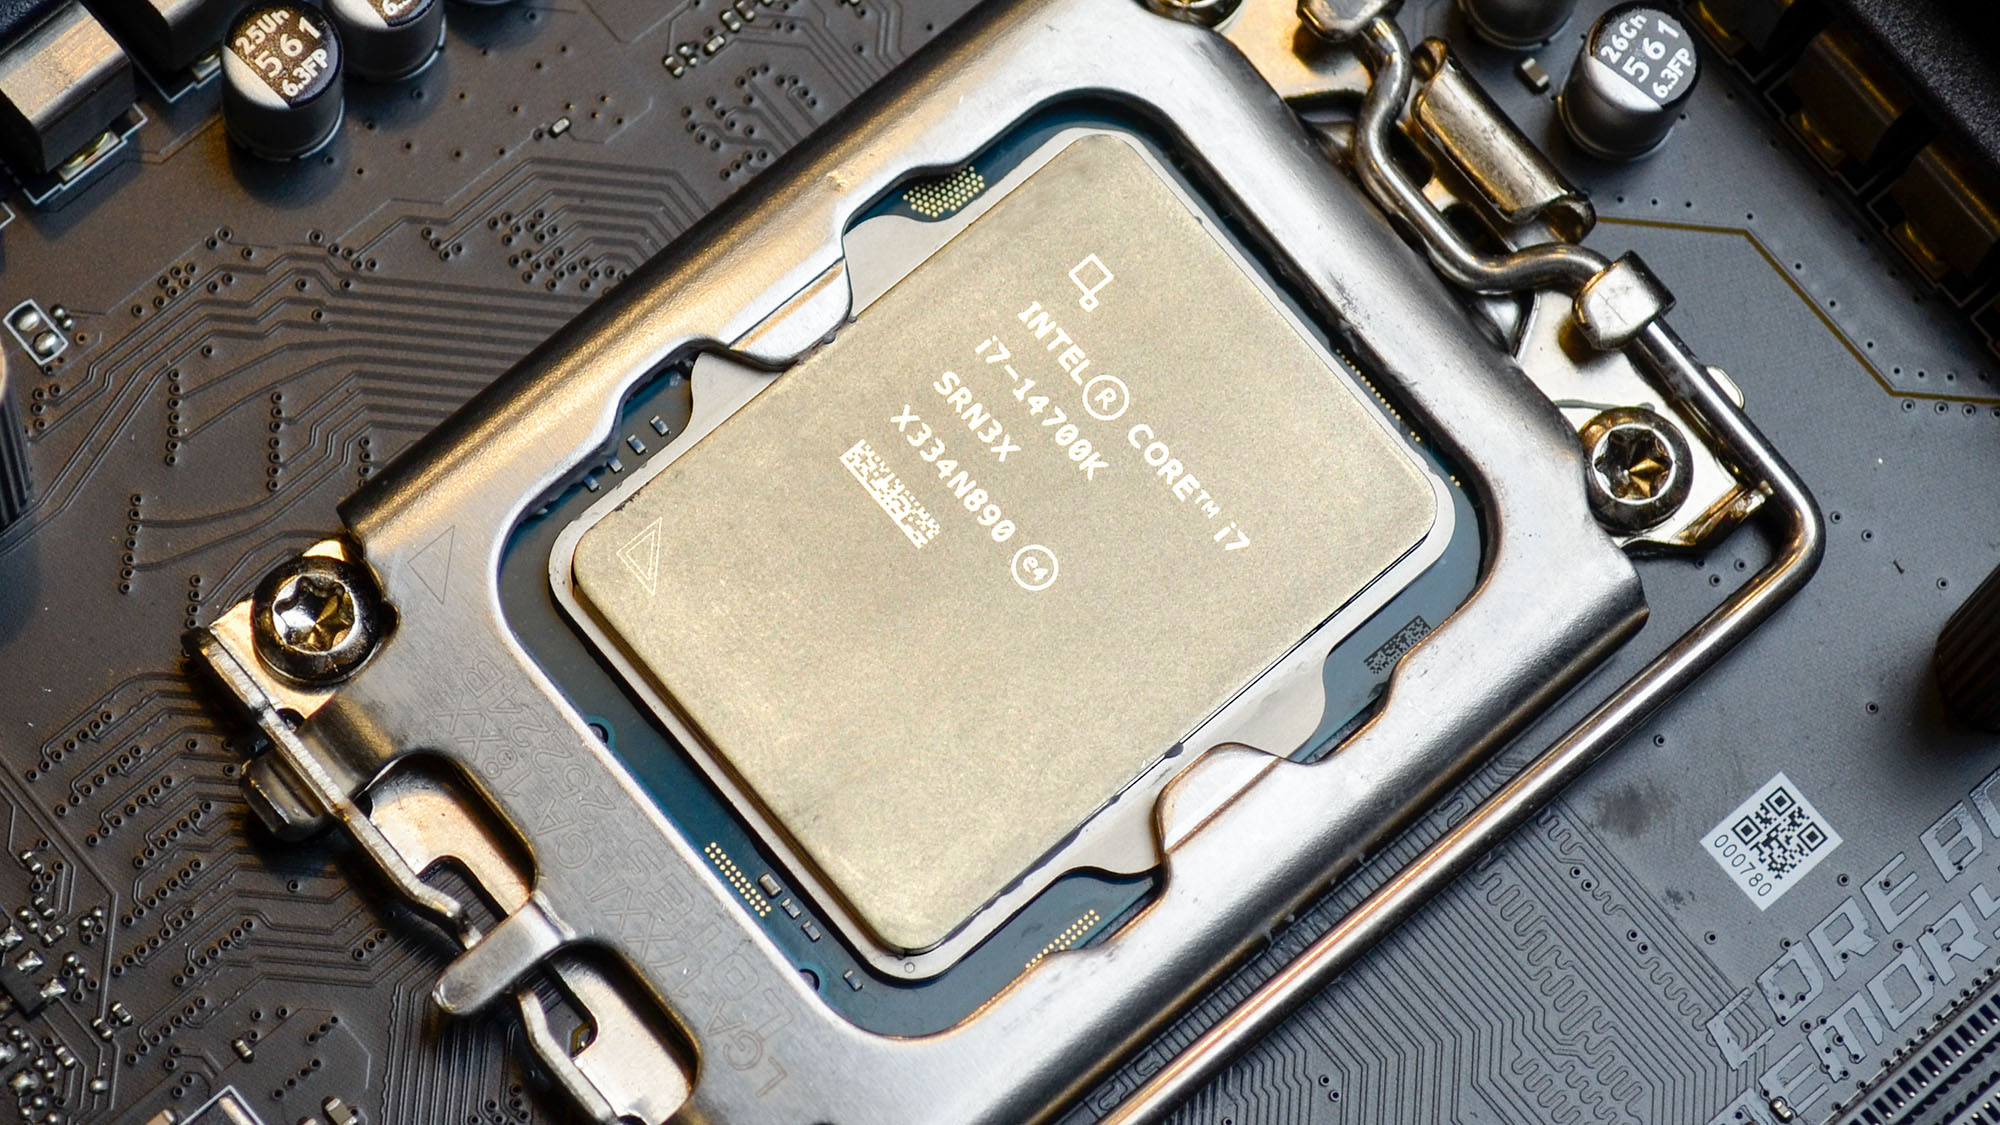 An Intel Core i7-14700K slotted into a motherboard